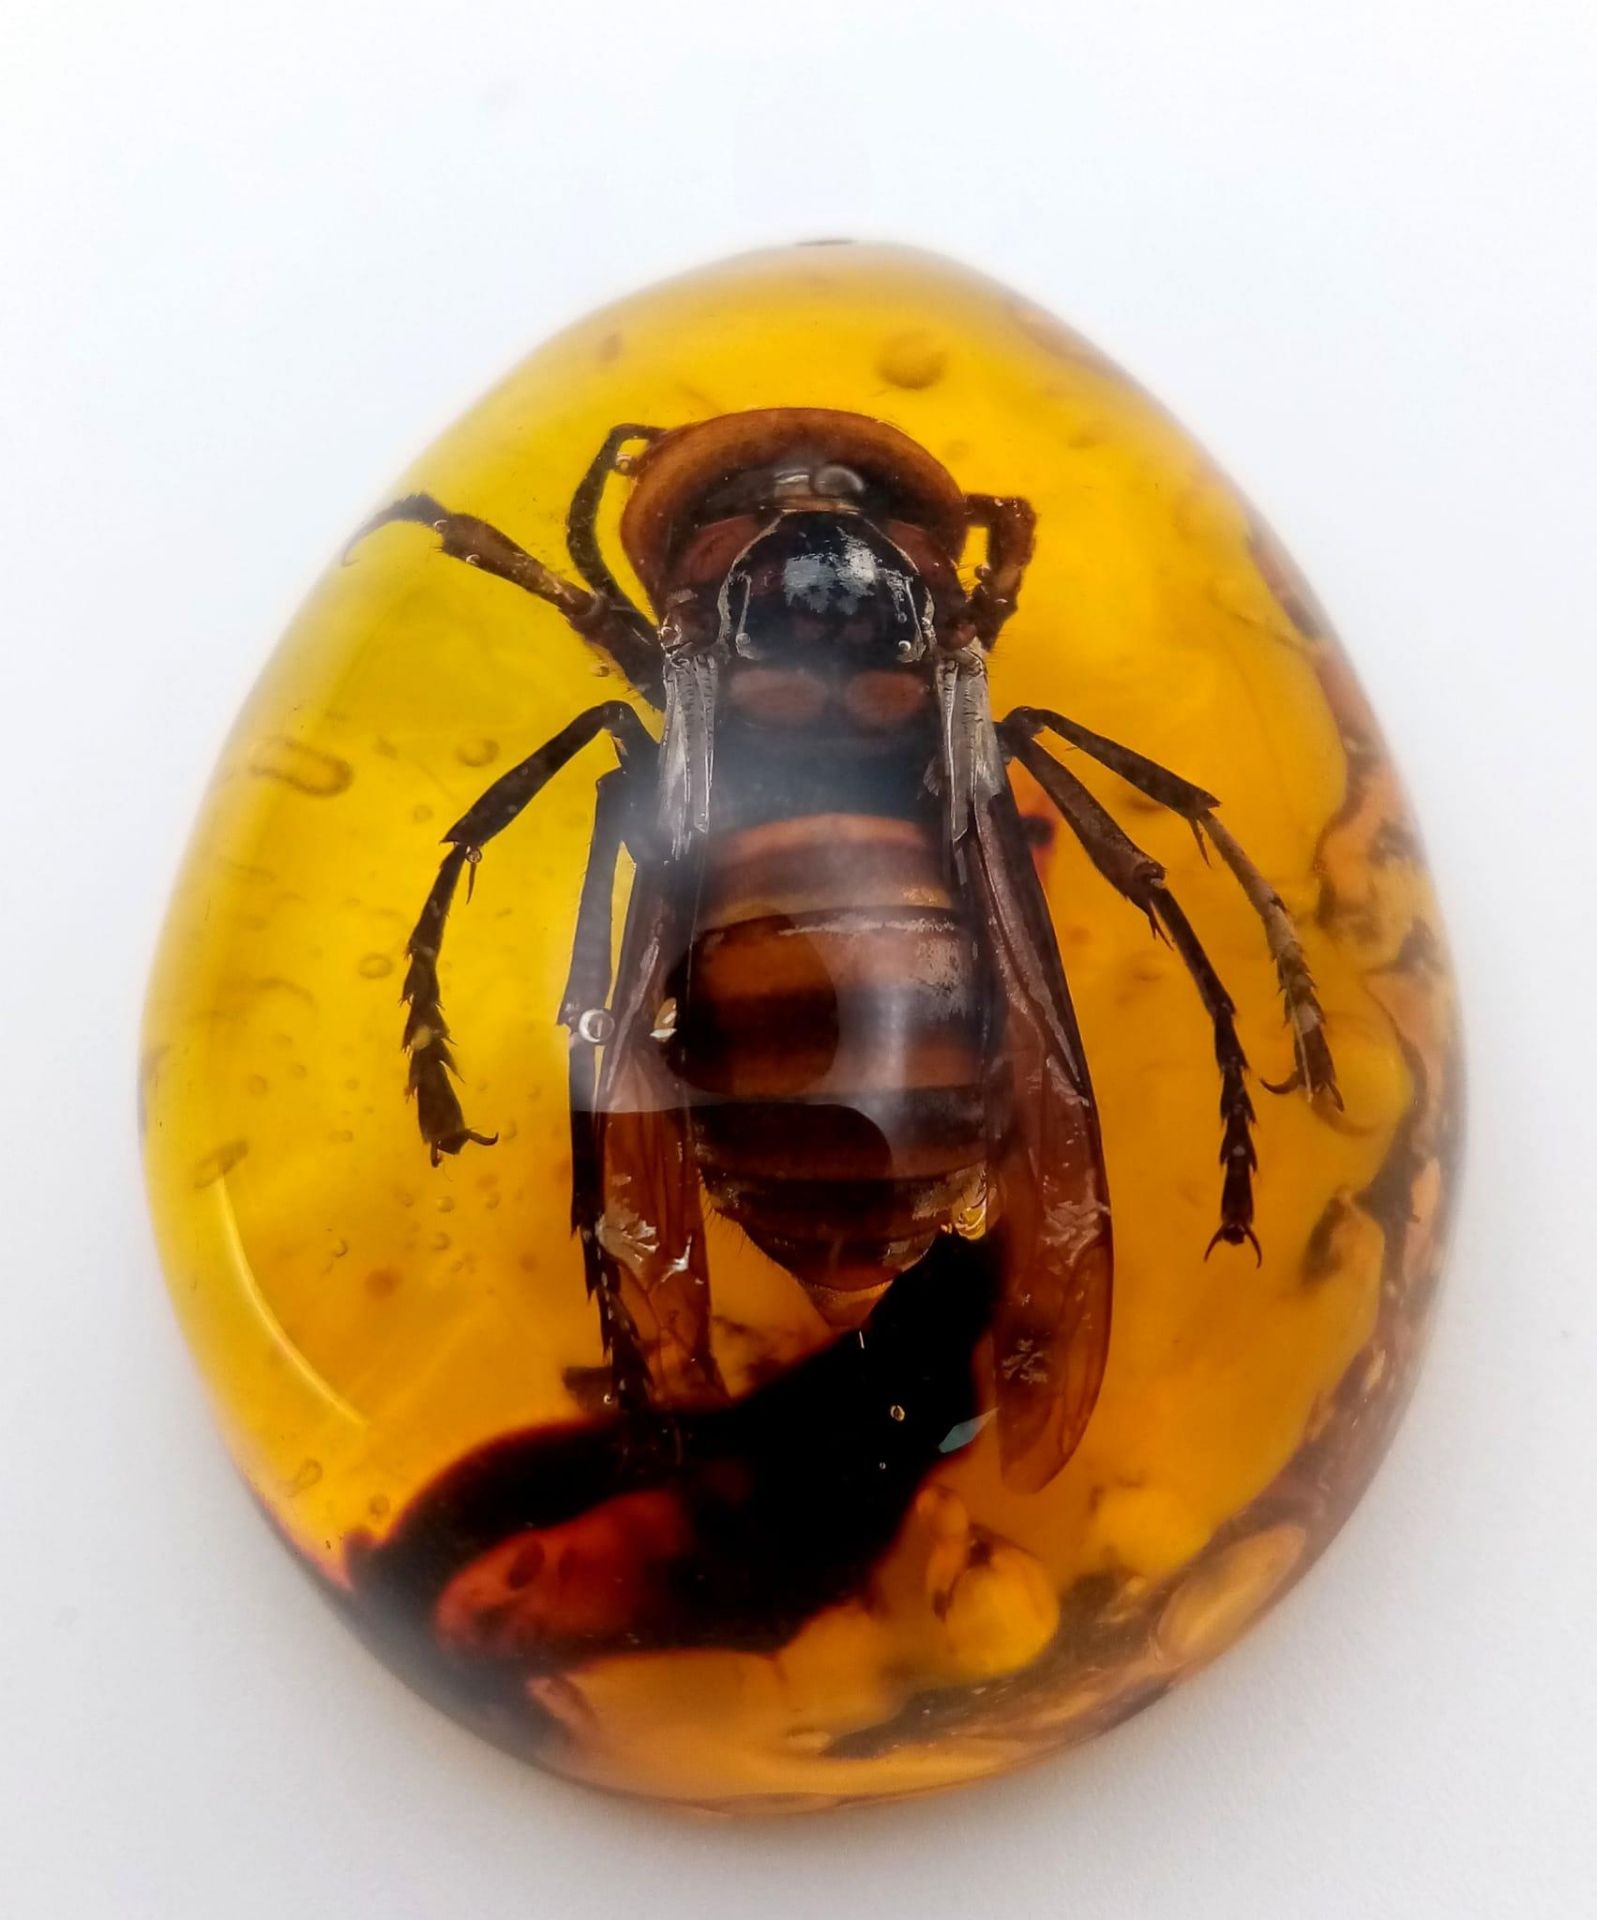 A Humongous Asian Hornet (possibly from another dimension) in an Amber Resin Prison. Pendant or - Image 3 of 3